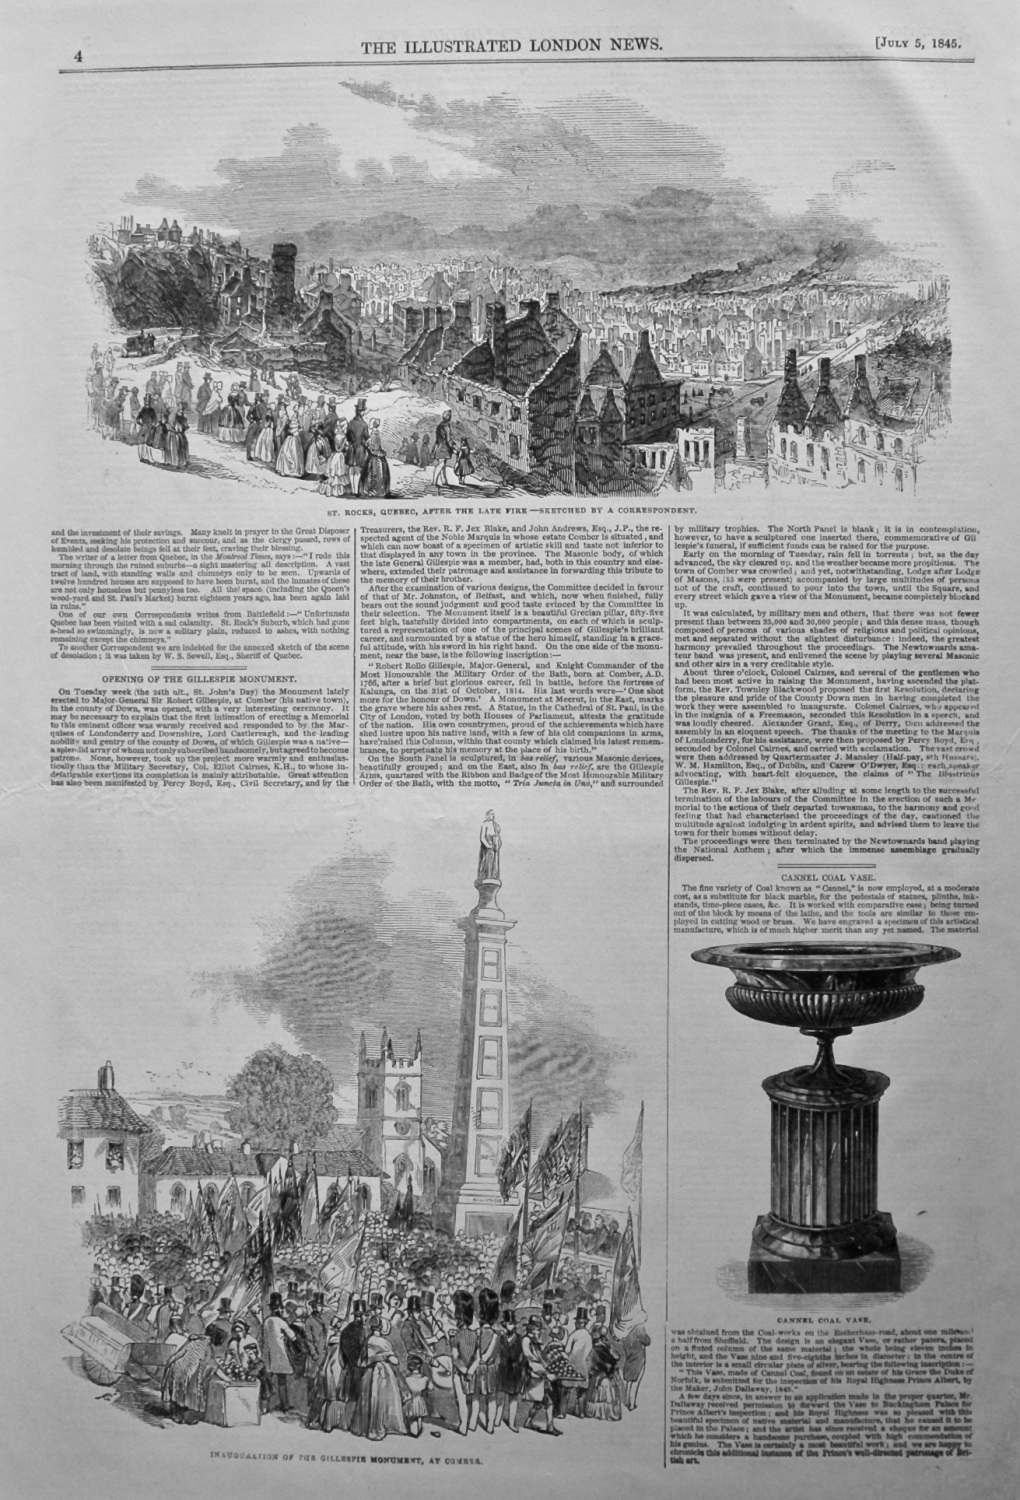 Opening of the Gillespie Monument. 1845.